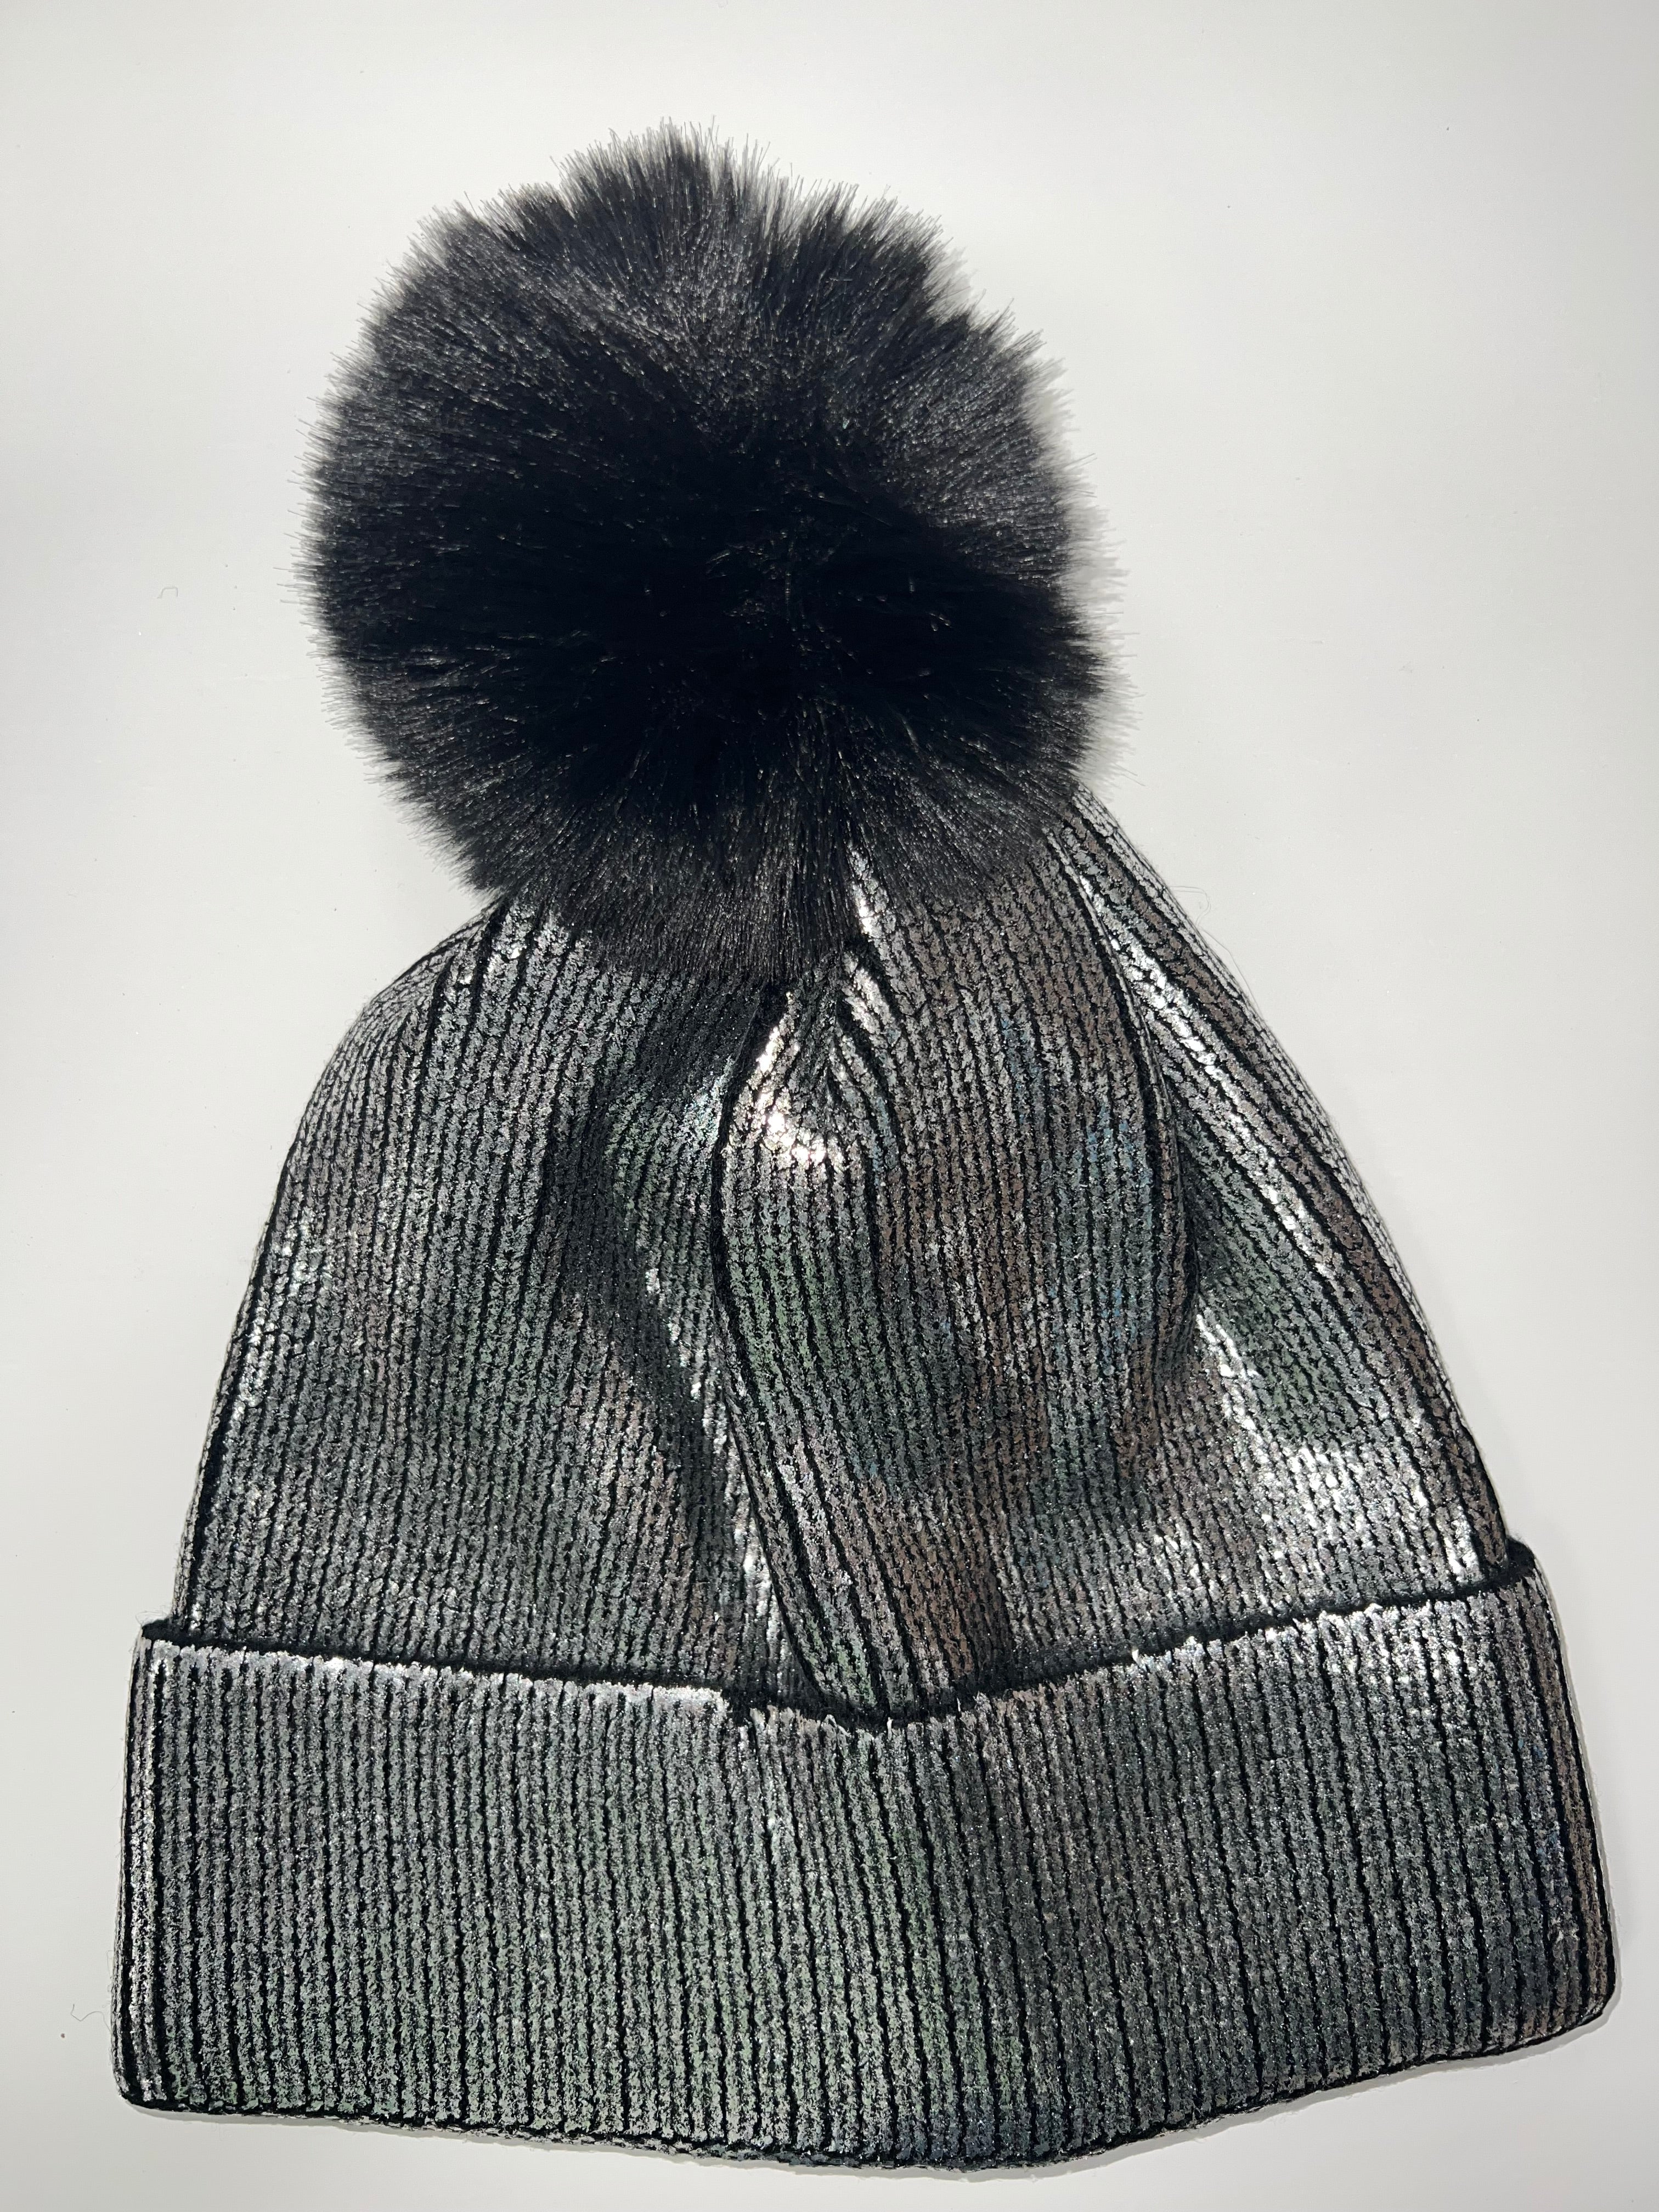 The Pom Pom Winter Hat  - Silver Letters / Initials